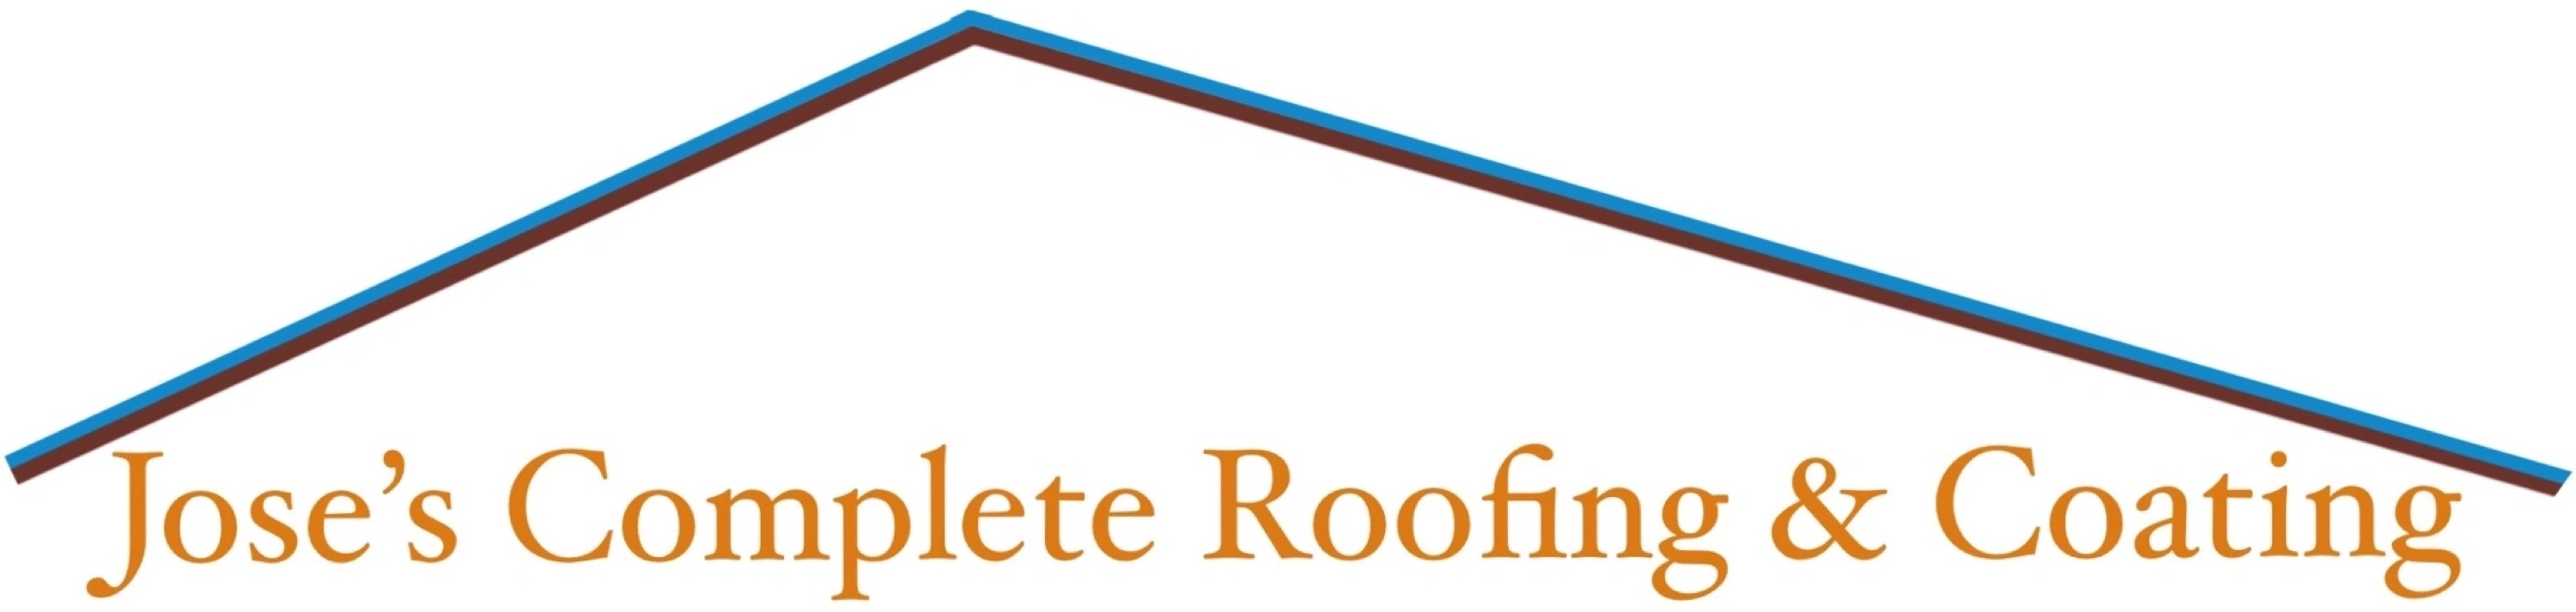 Jose's Complete Roofing and Coating Logo